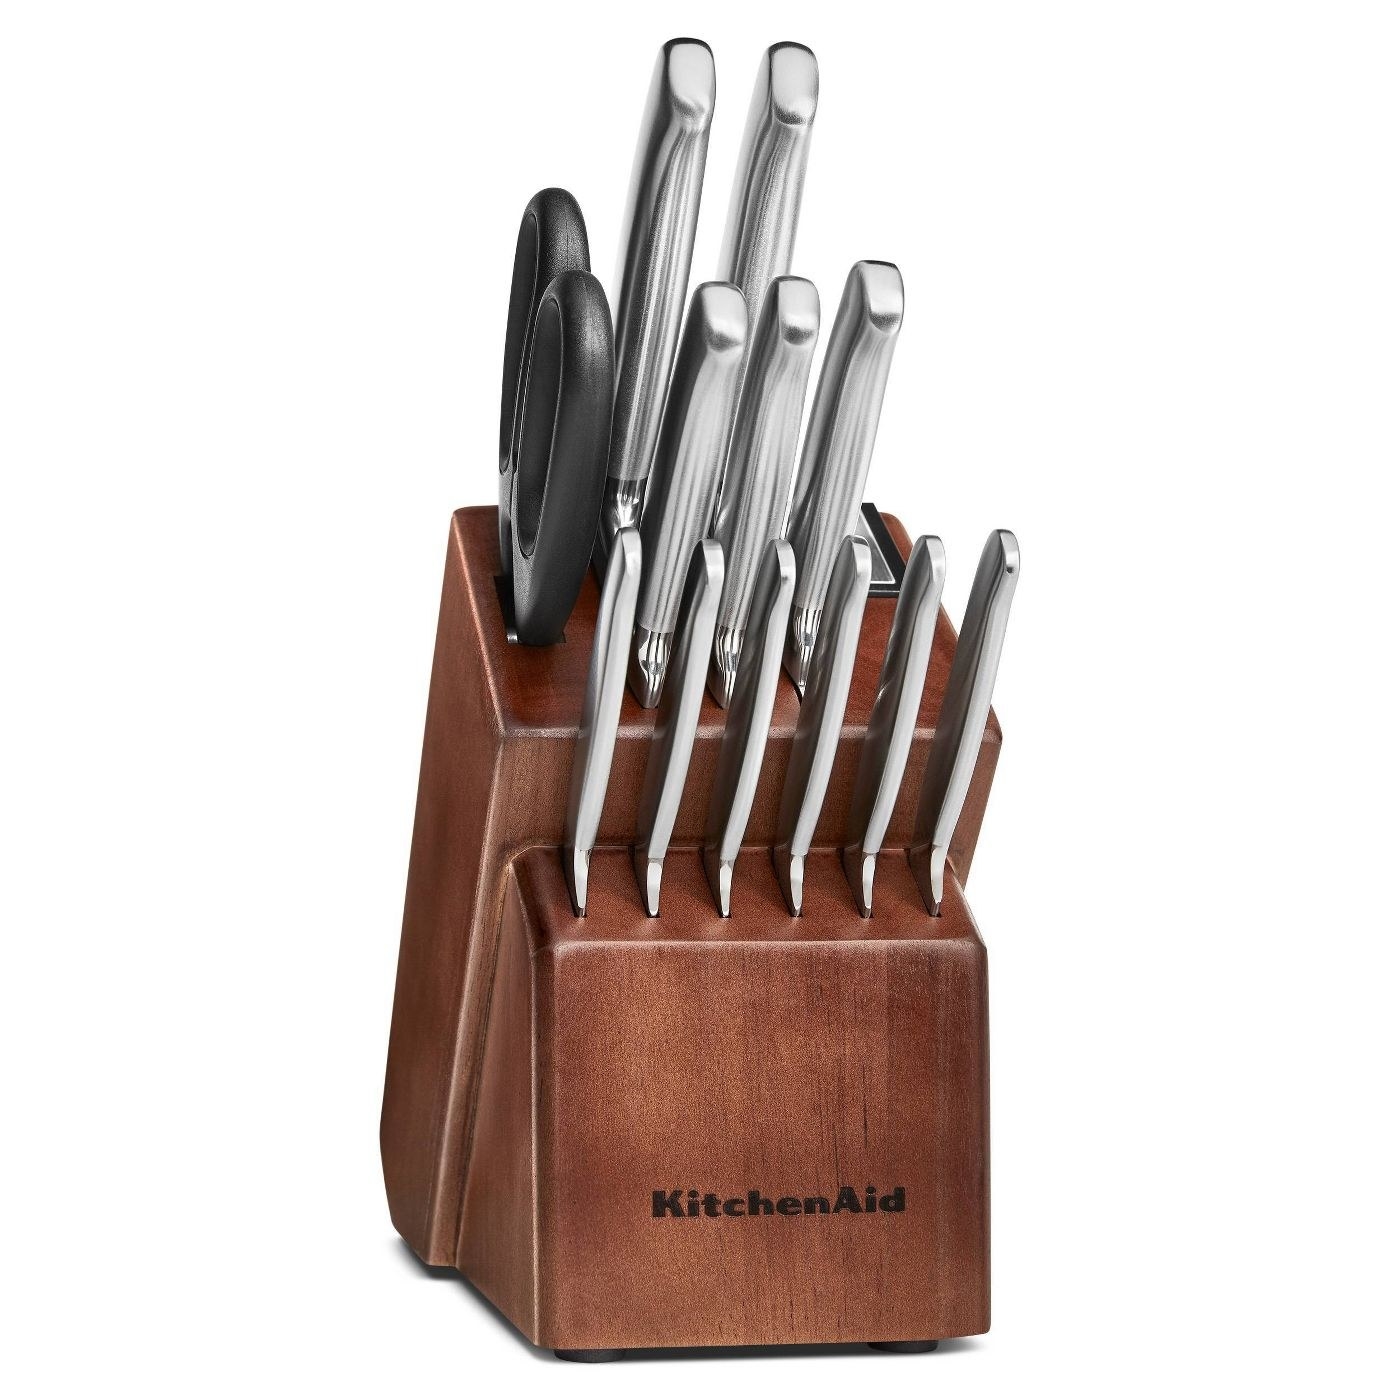 The maple knife block with 14 knives